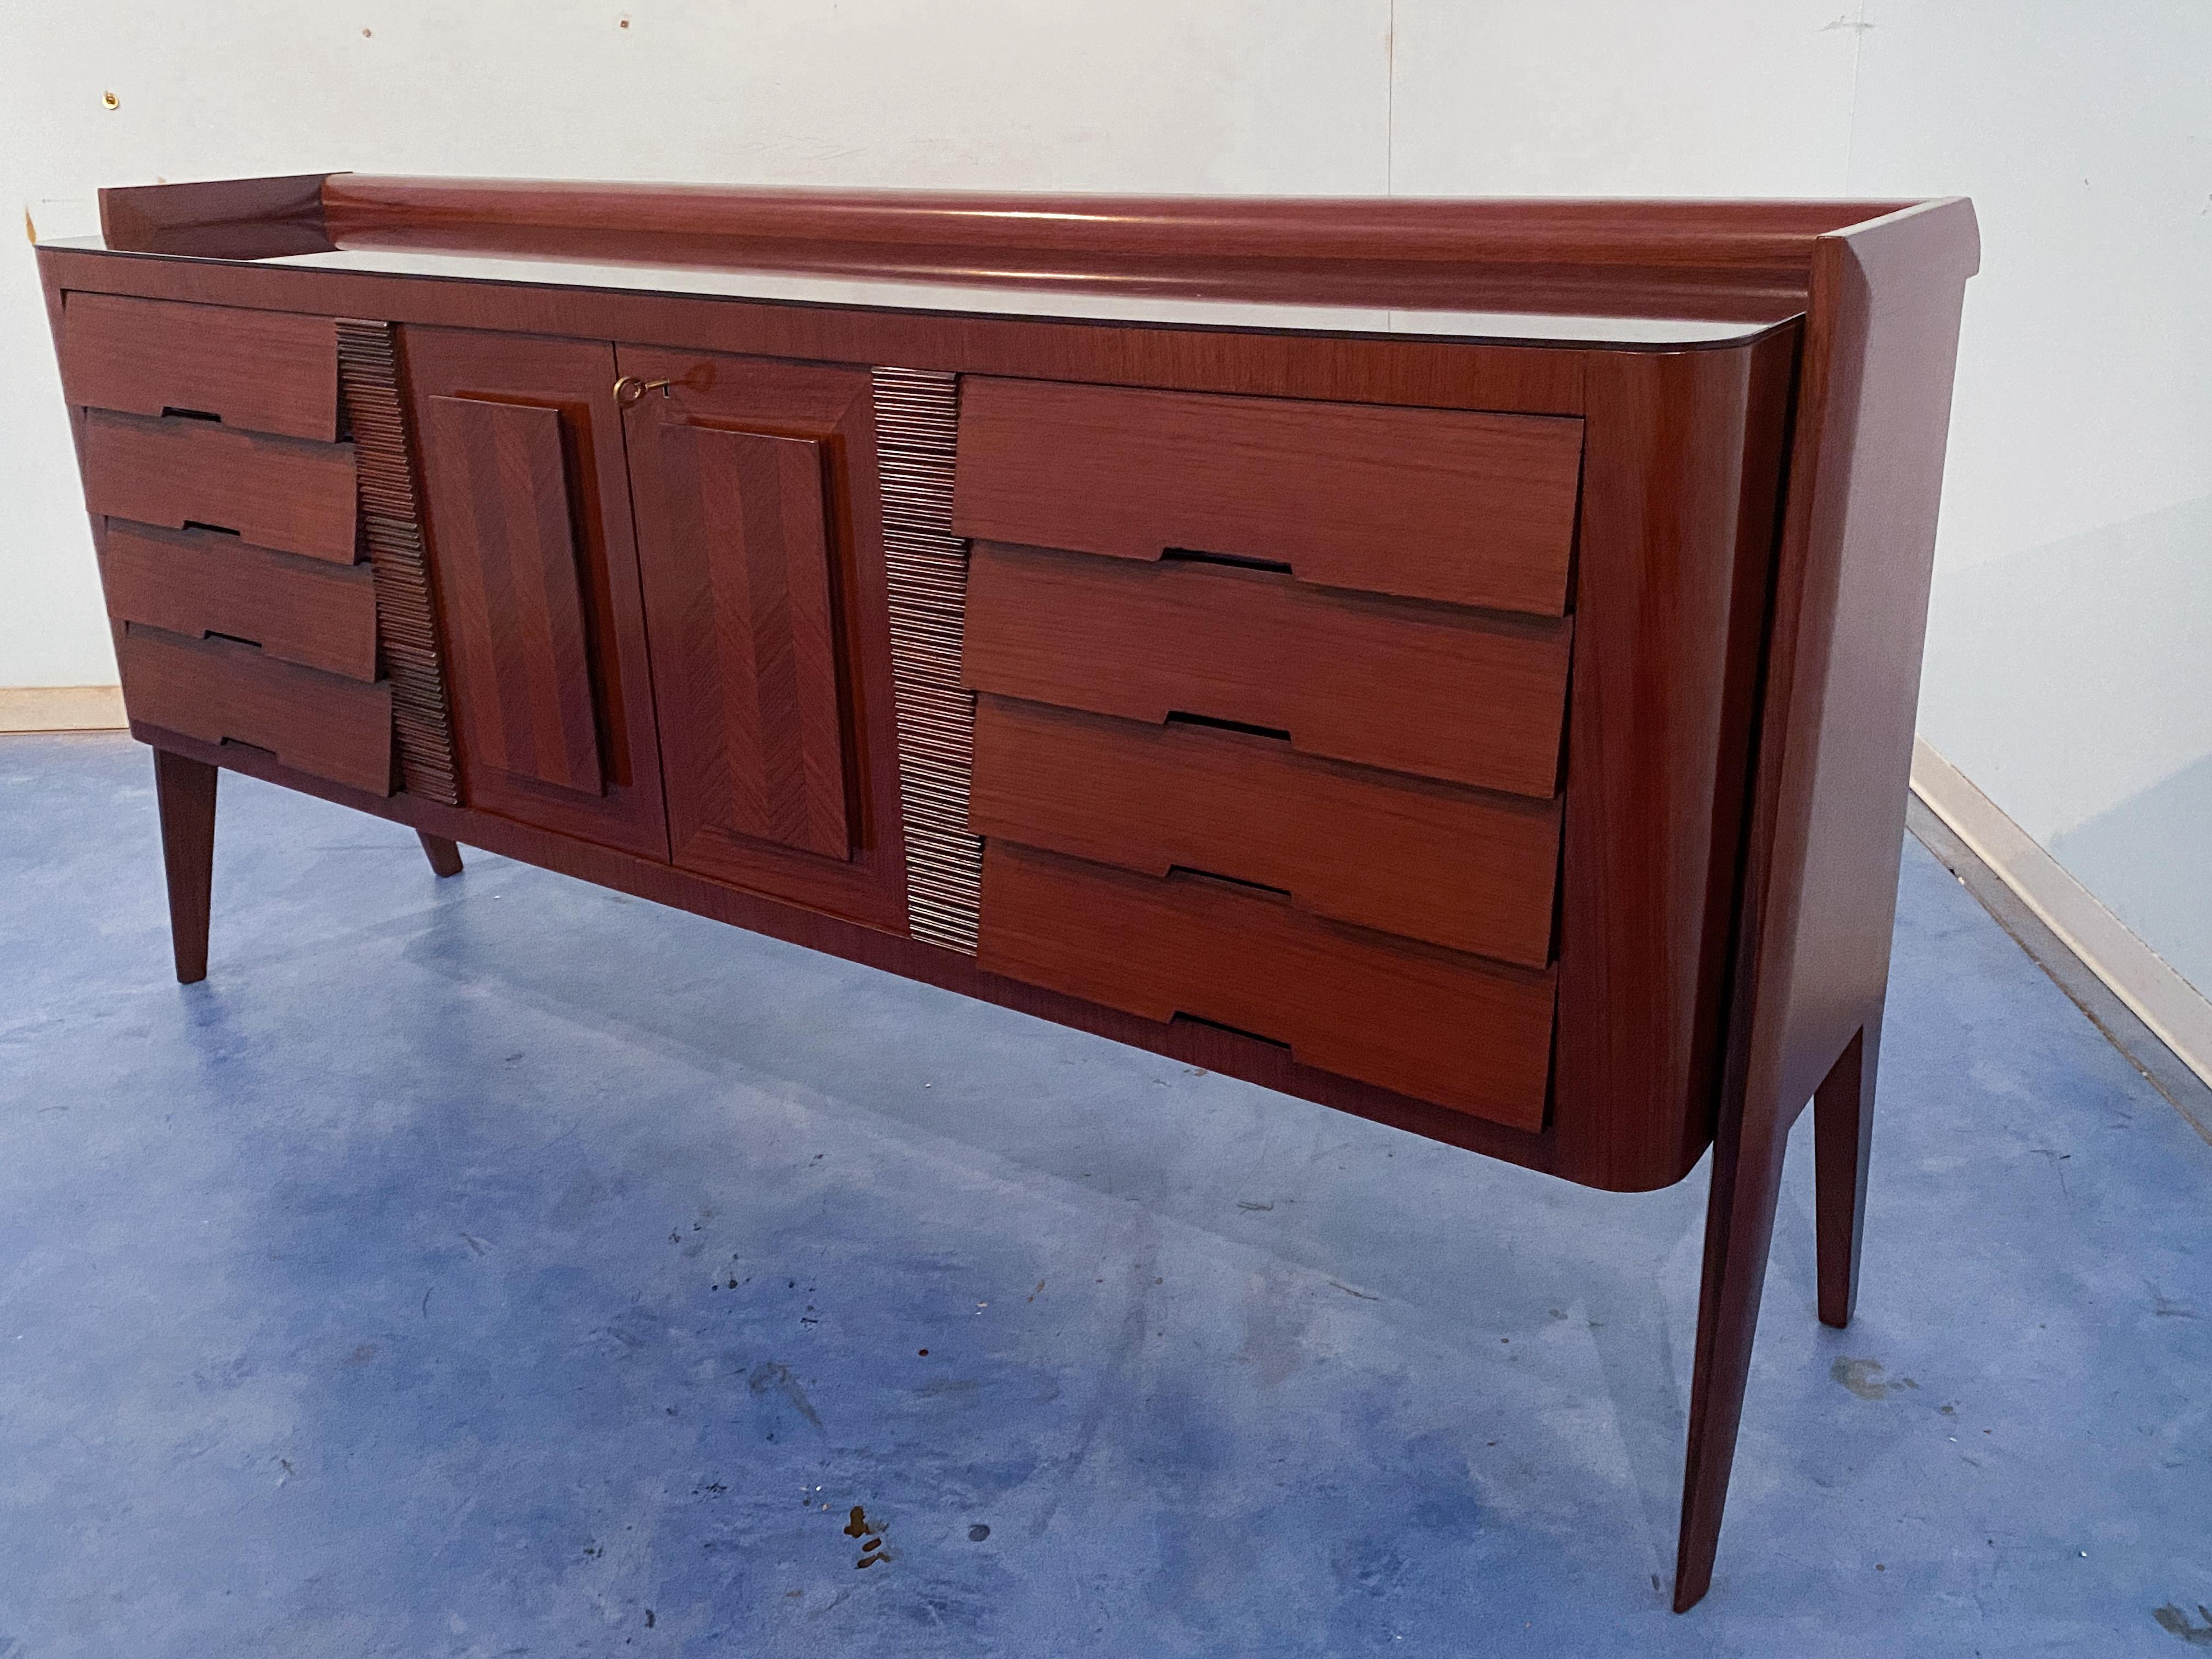 Mid-20th Century Italian Midcentury Sideboard Bar by Vittorio Dassi, 1950s For Sale